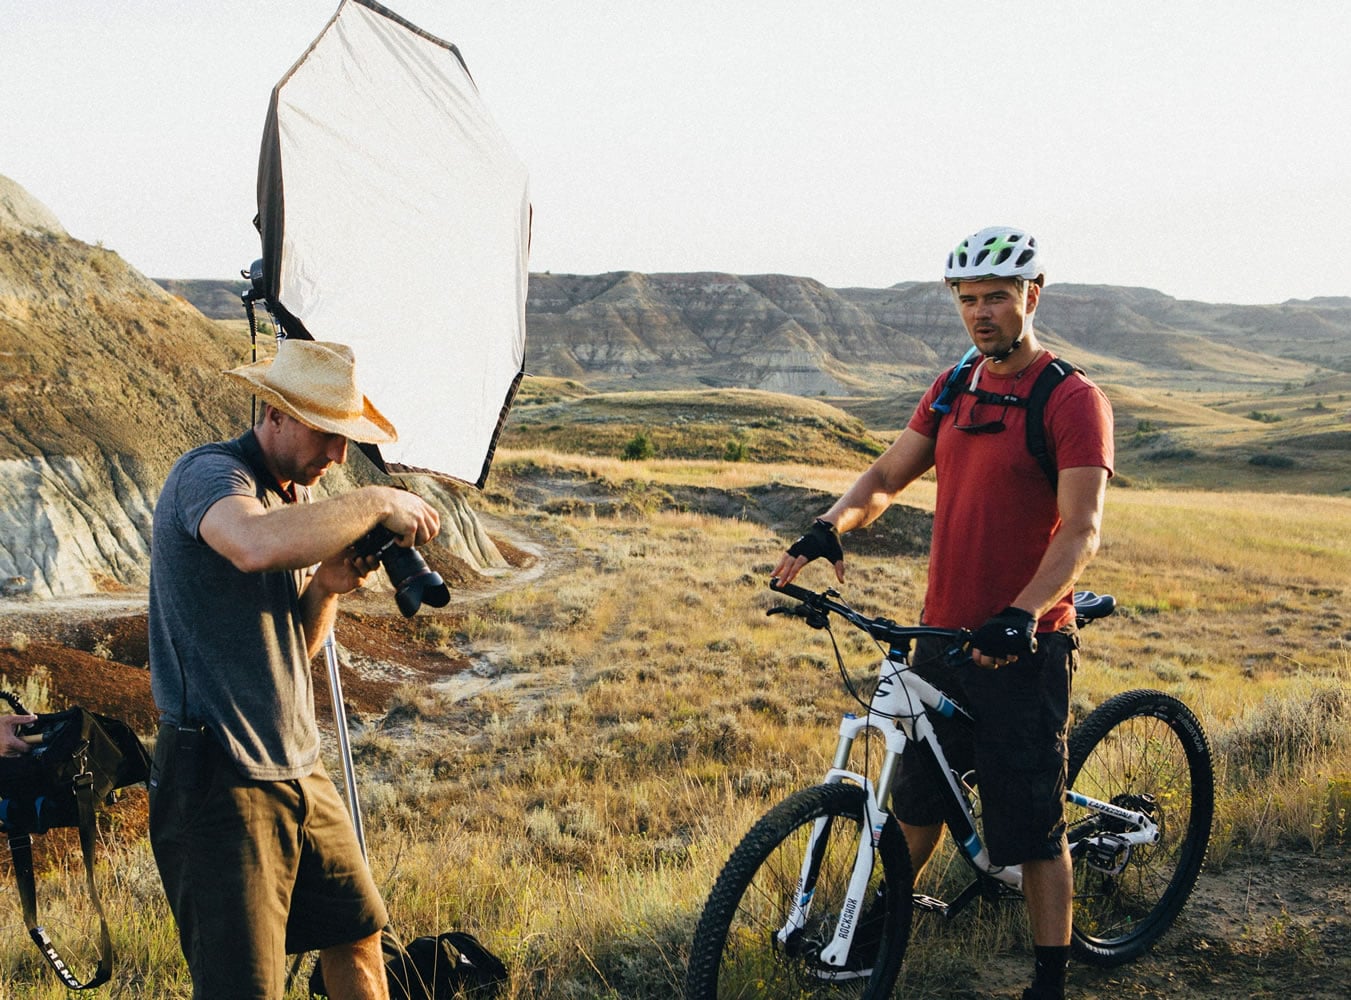 Actor Josh Duhamel is filmed by a crew Aug. 13 in Theodore Roosevelt National Park at the Little Missouri Grasslands near Medora, N.D., for a series of TV commercials and ads promoting tourism in the state.